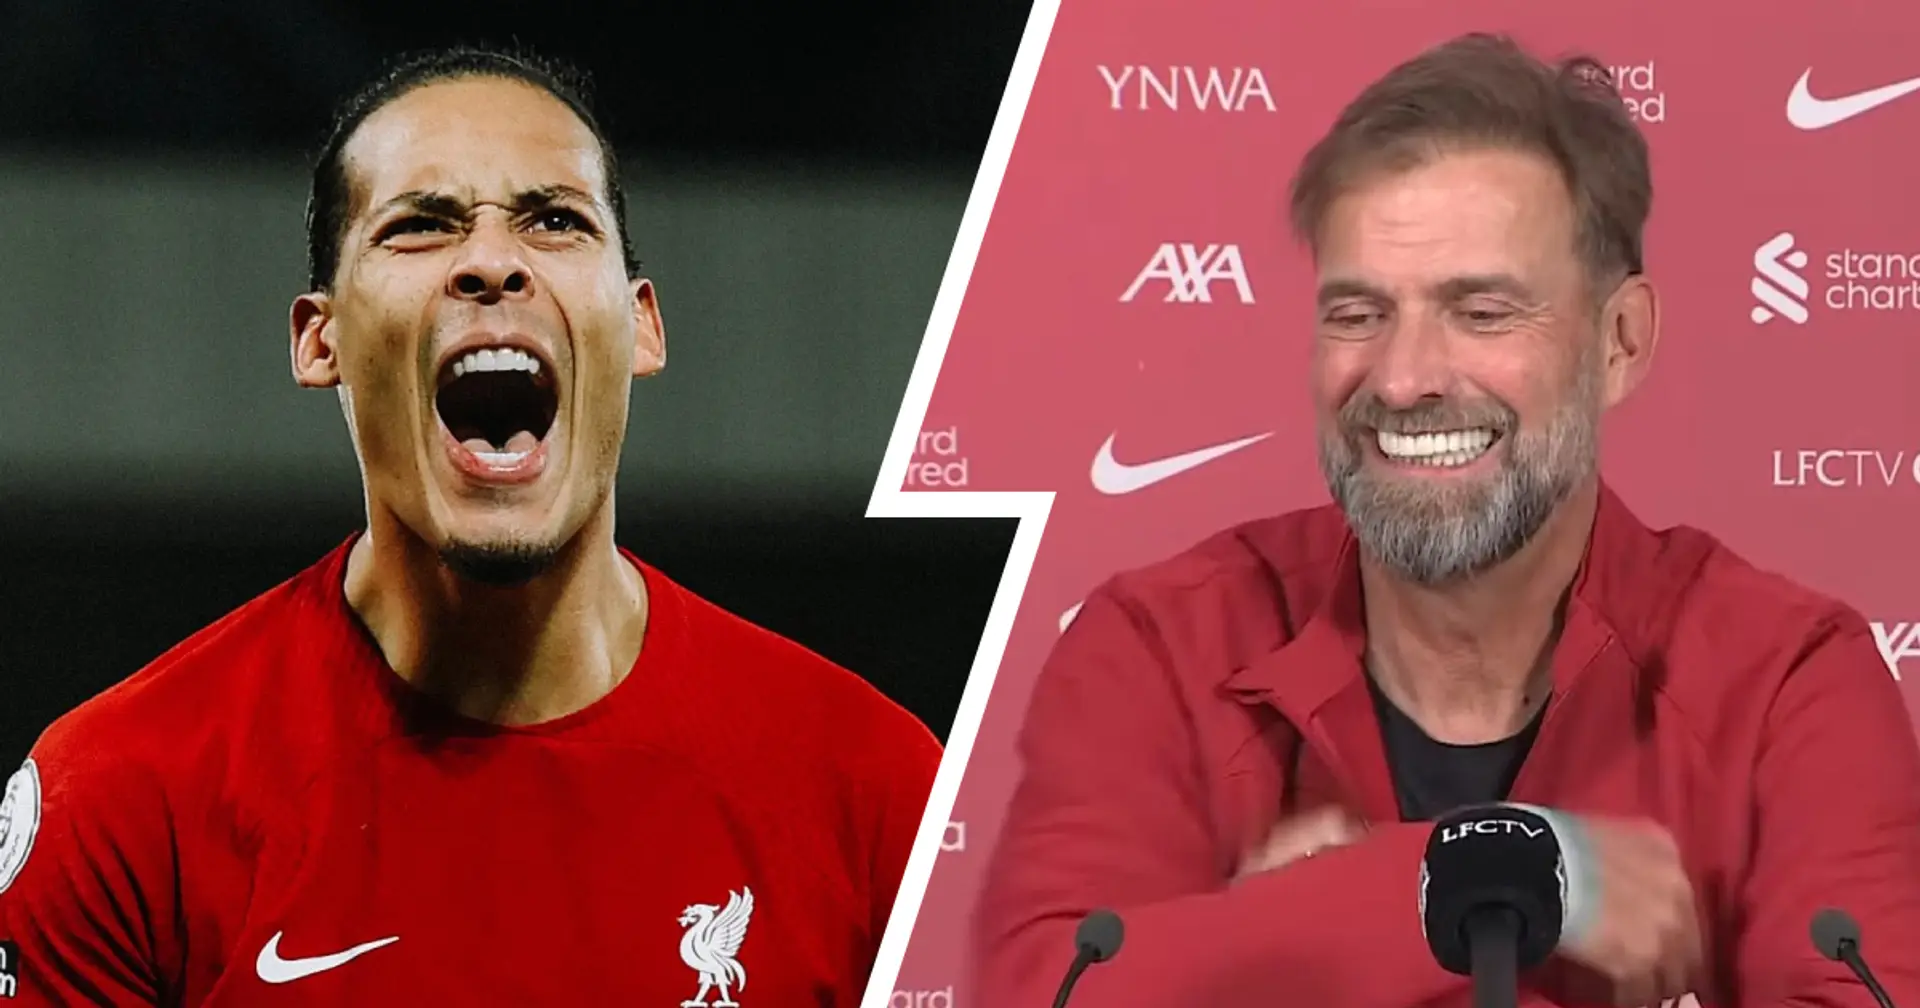 'We all need that': Klopp reacts to Van Dijk's performance vs Wolves